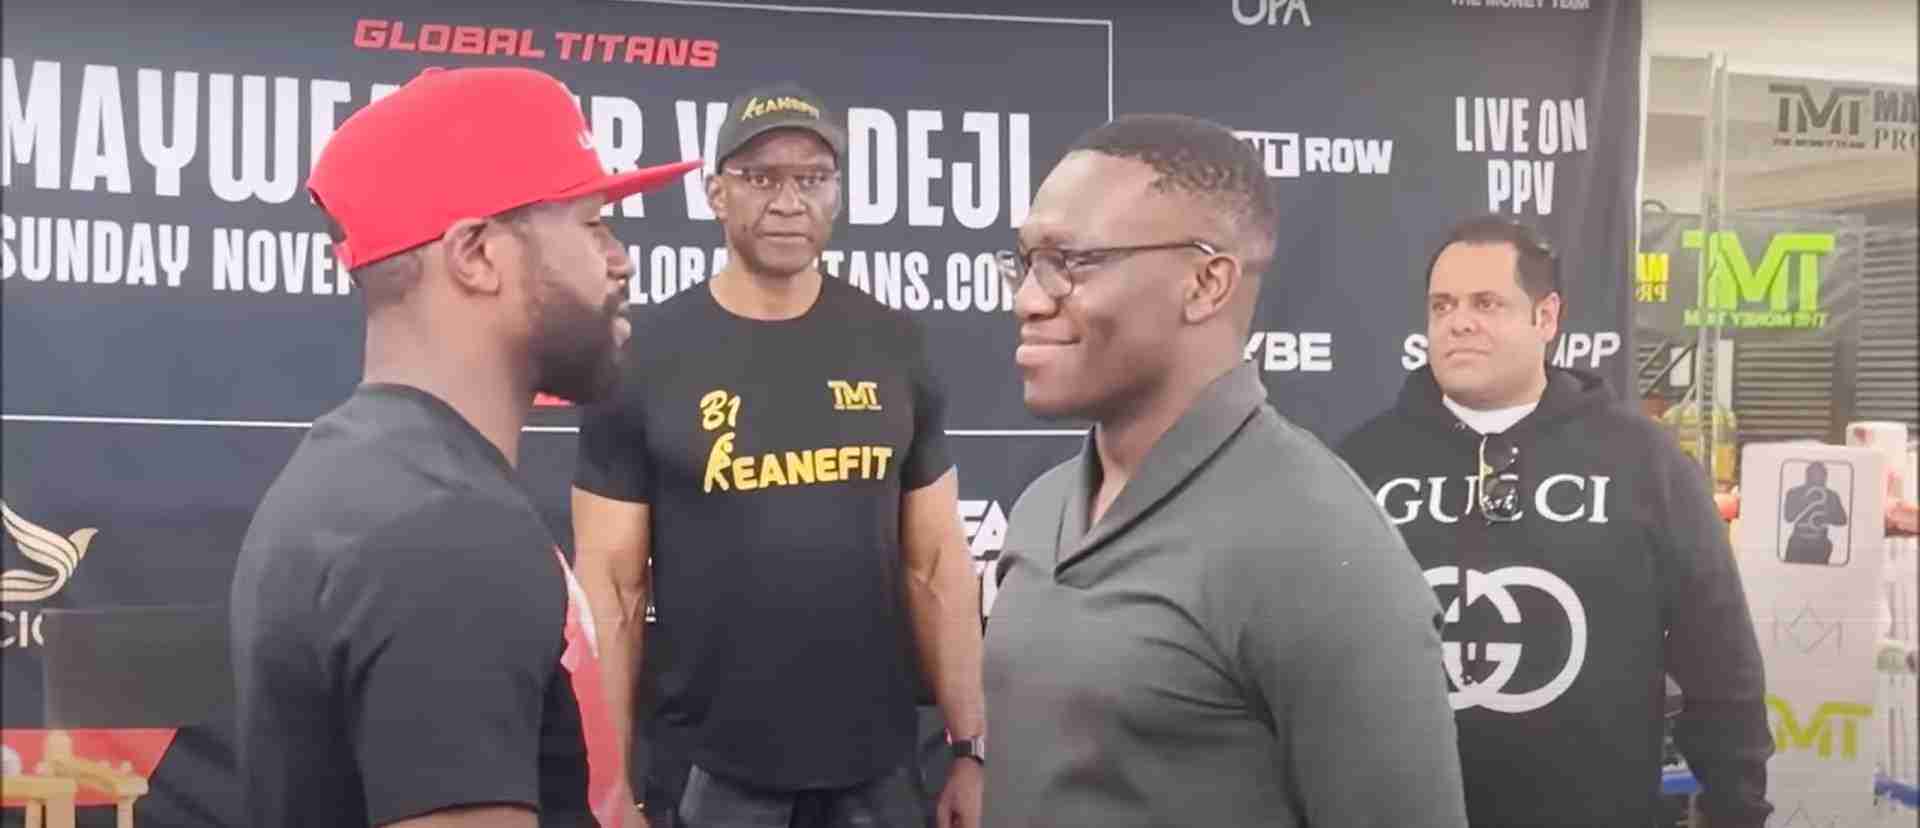 Watch: Mayweather Faces Off With Deji